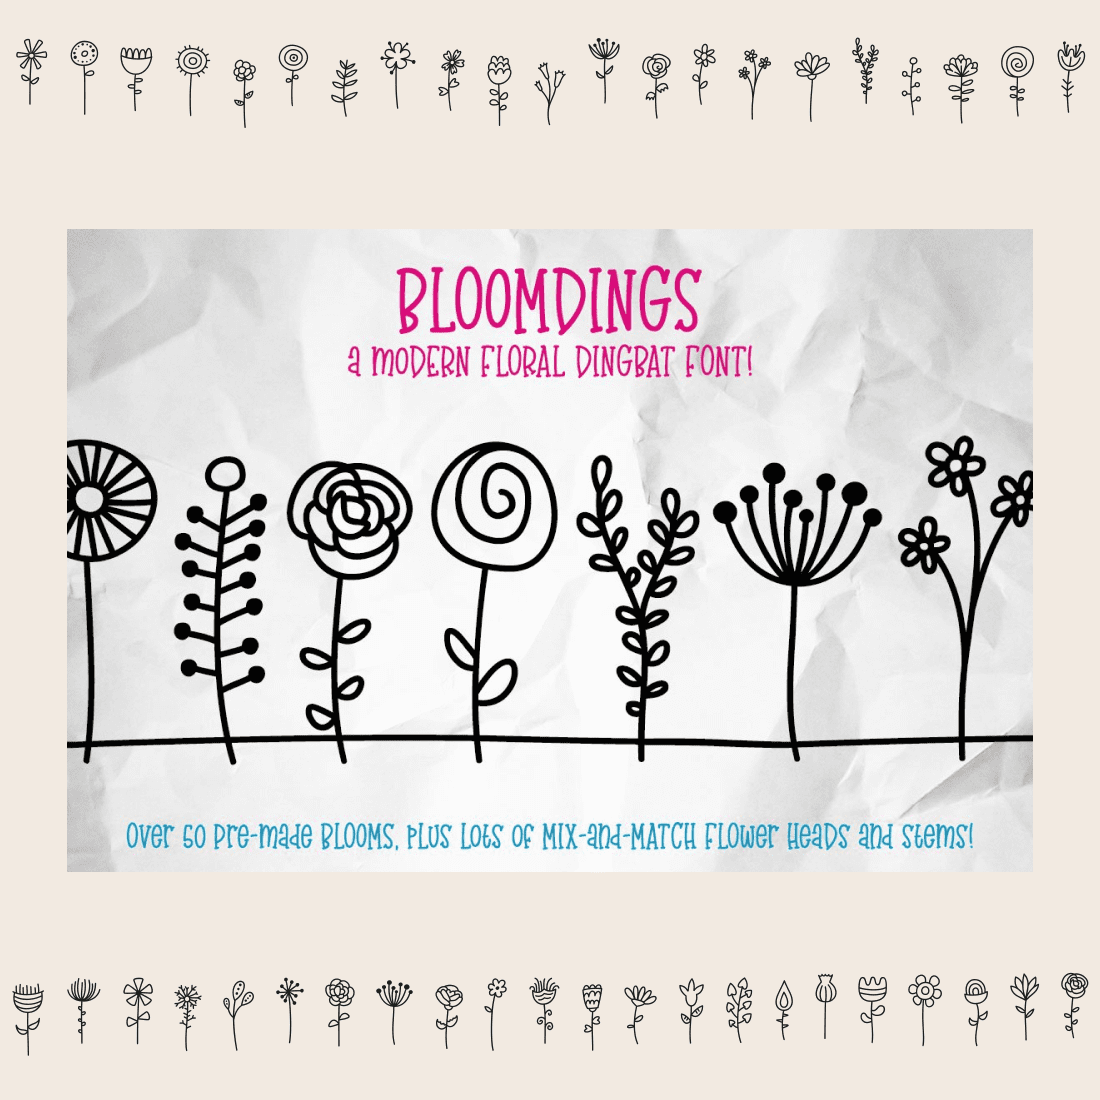 Bloomdings: Abstract Floral Dingbats - cute example in minimalistic style.